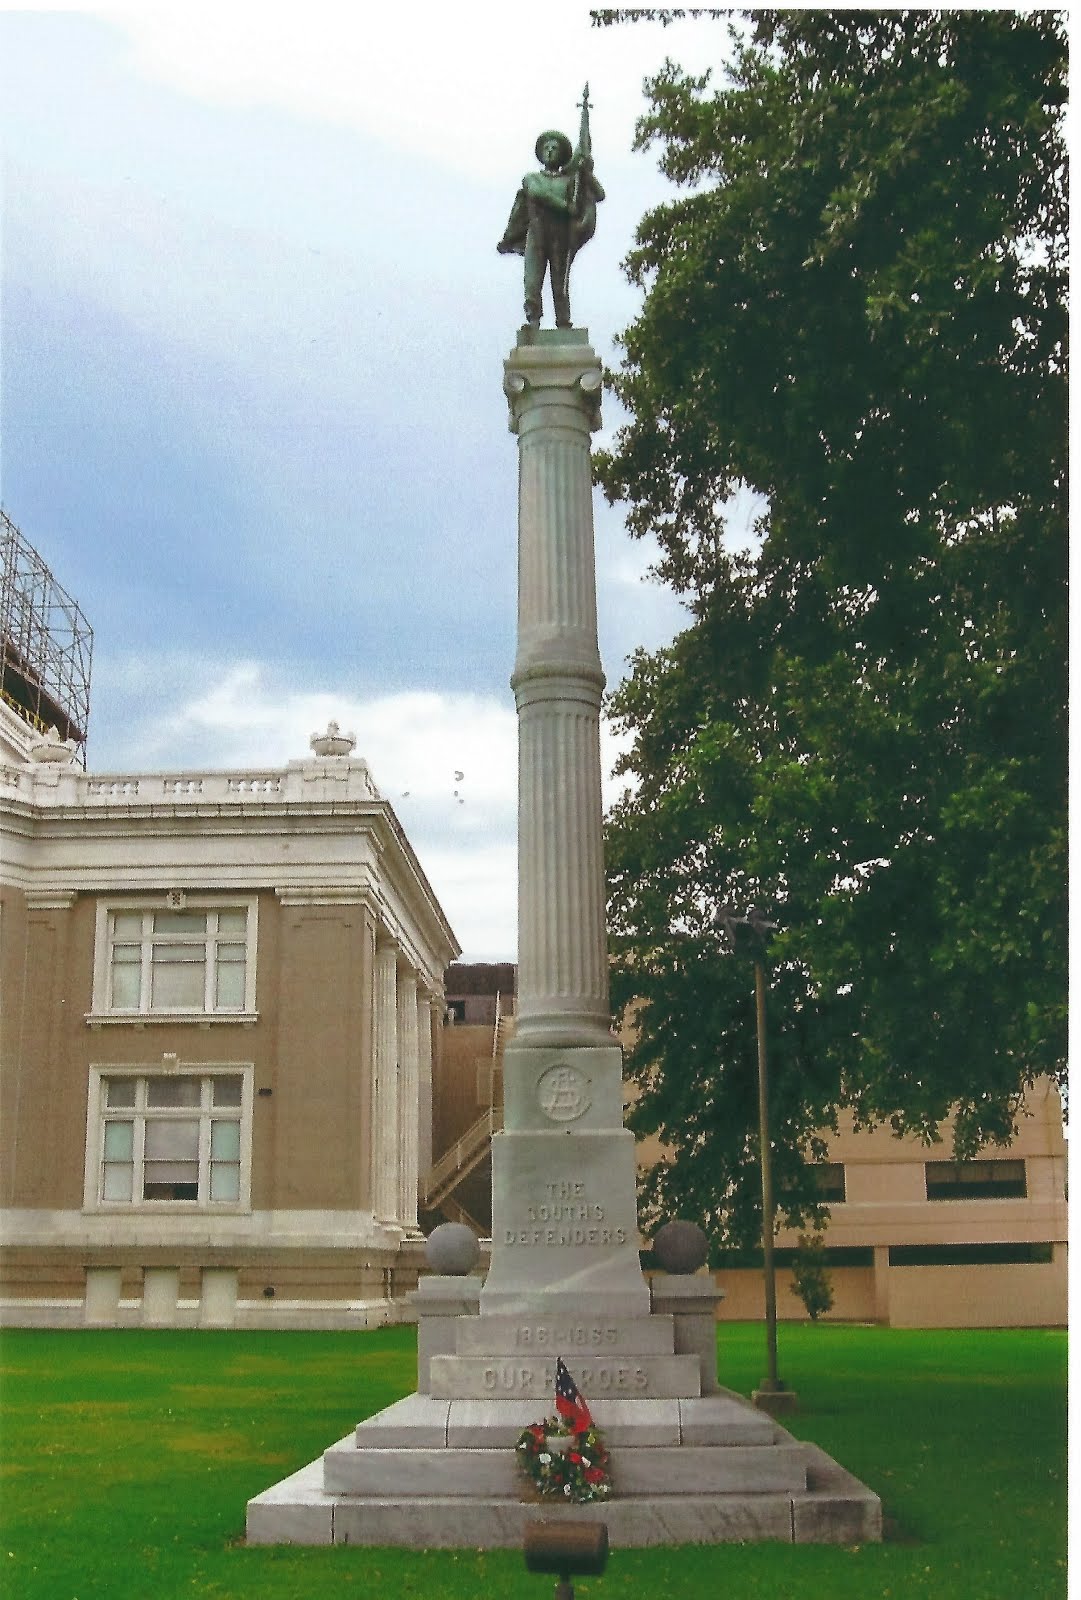 The South's Defenders Memorial Monument